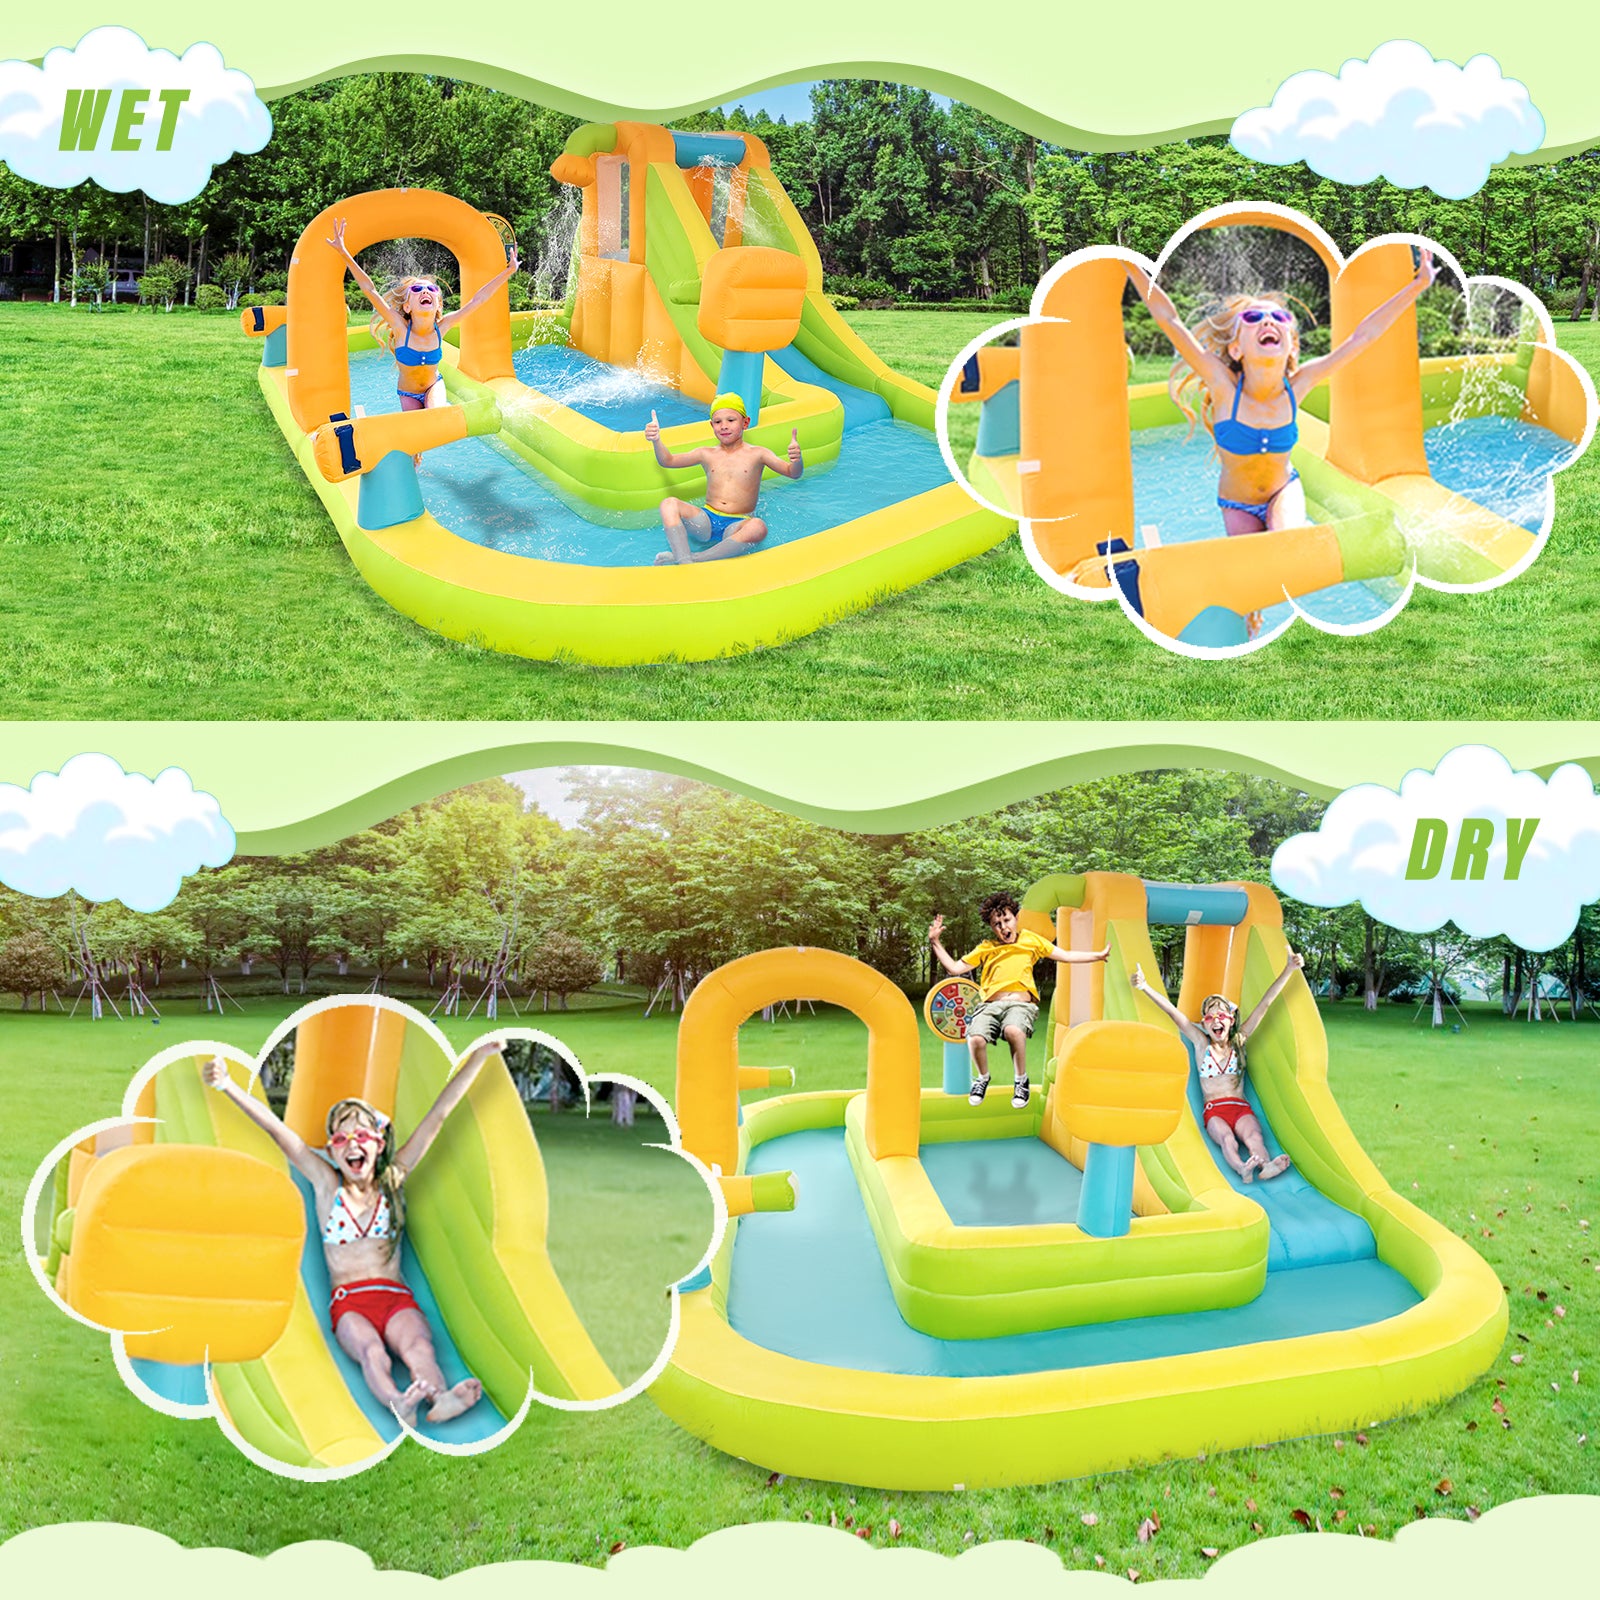 ABY Inflatable Bounce House with Water Slide 8-IN-1 - AKSPORT